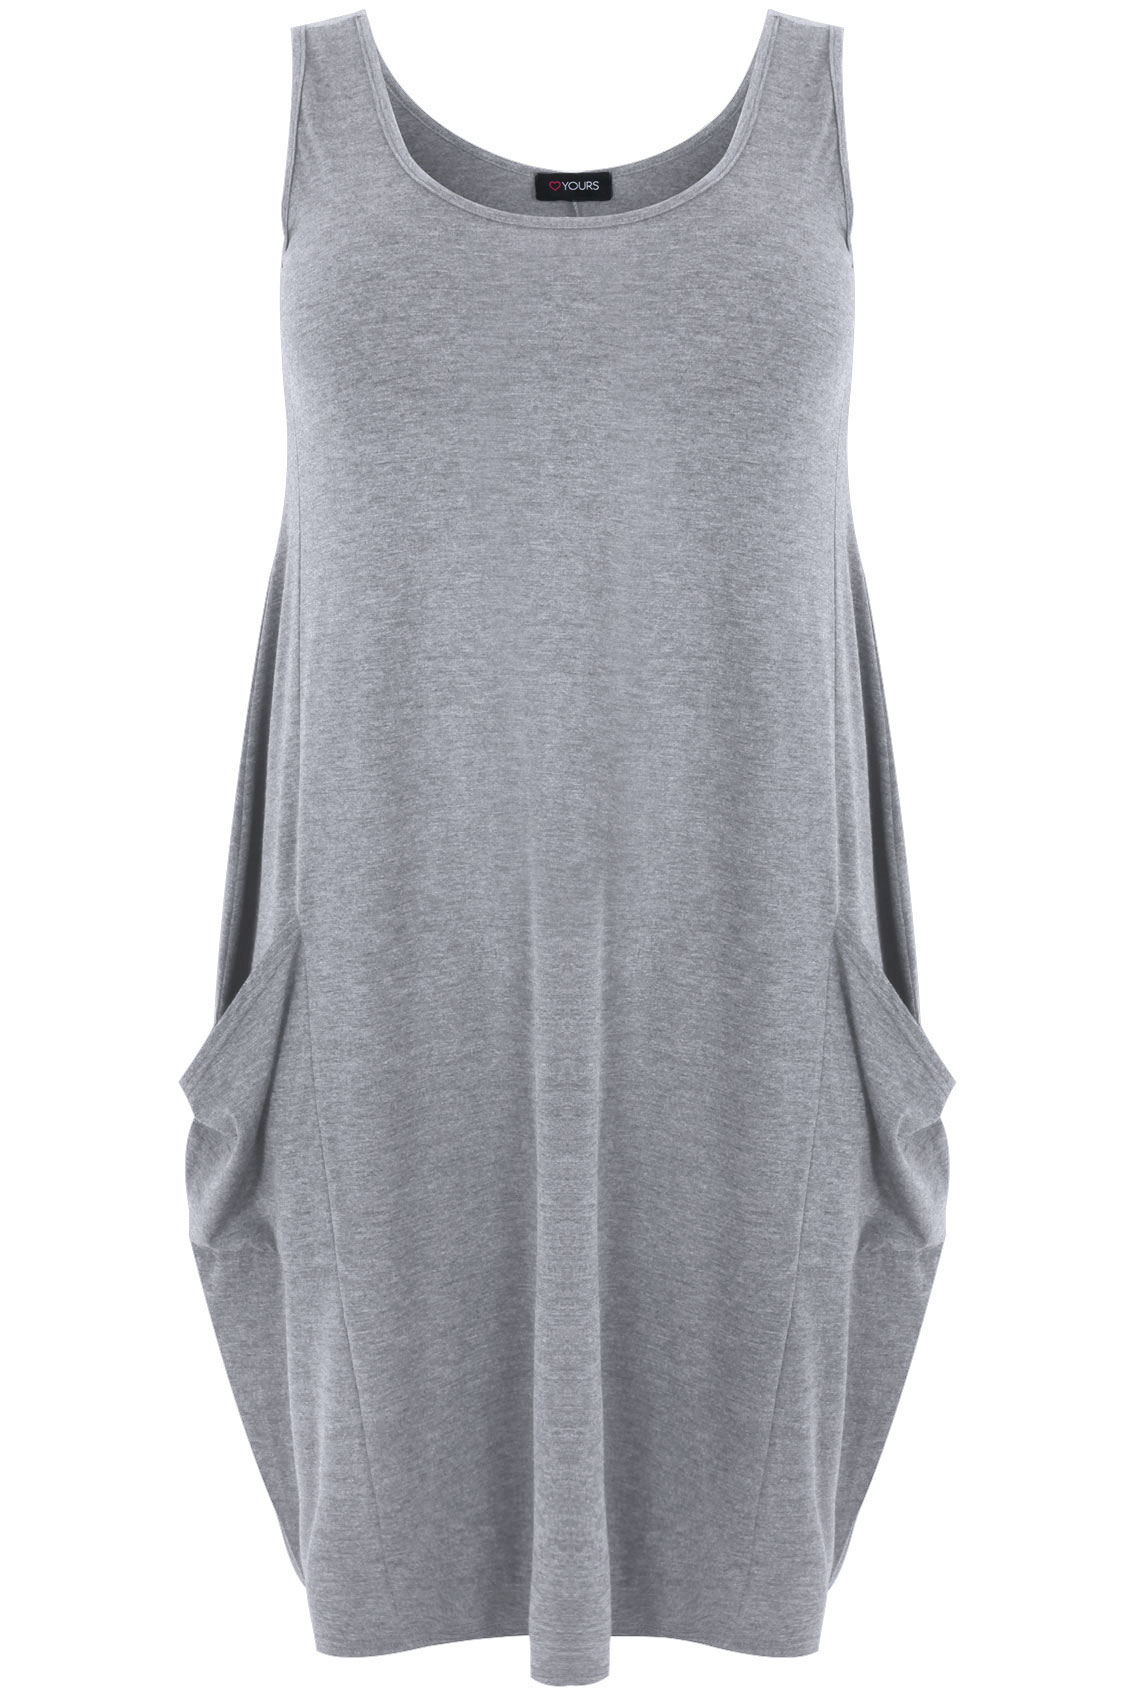 Grey Marl Sleeveless Jersey Dress with Dropped Pockets Plus Size 14 to 36